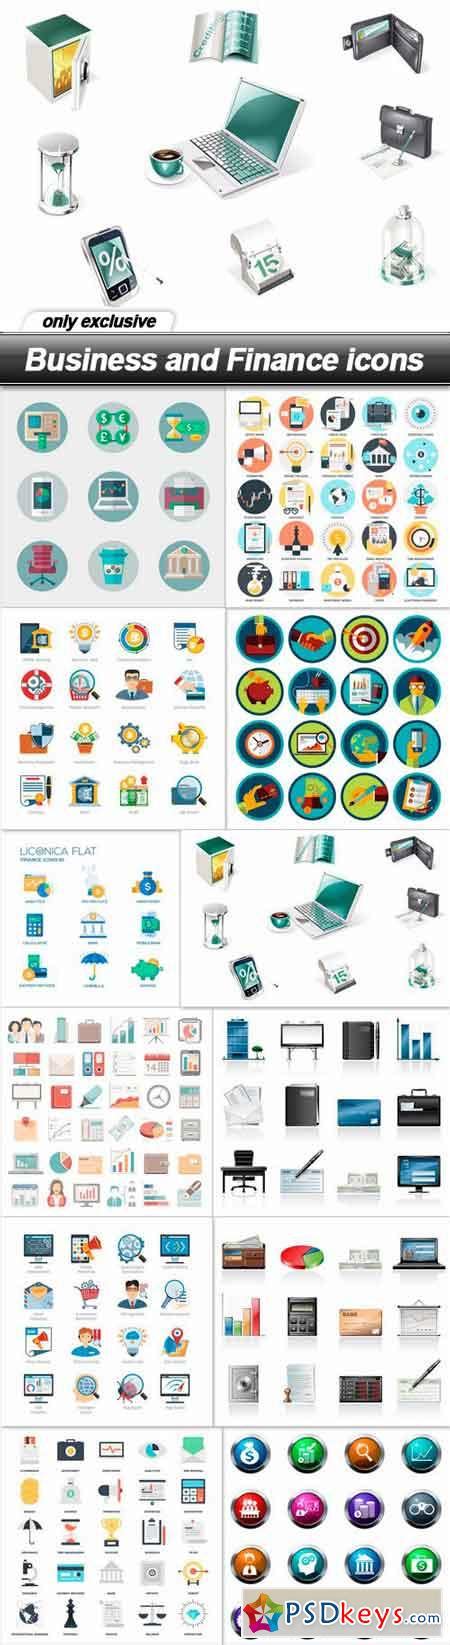 Business And Finance Icons 12 Eps Free Download Photoshop Vector